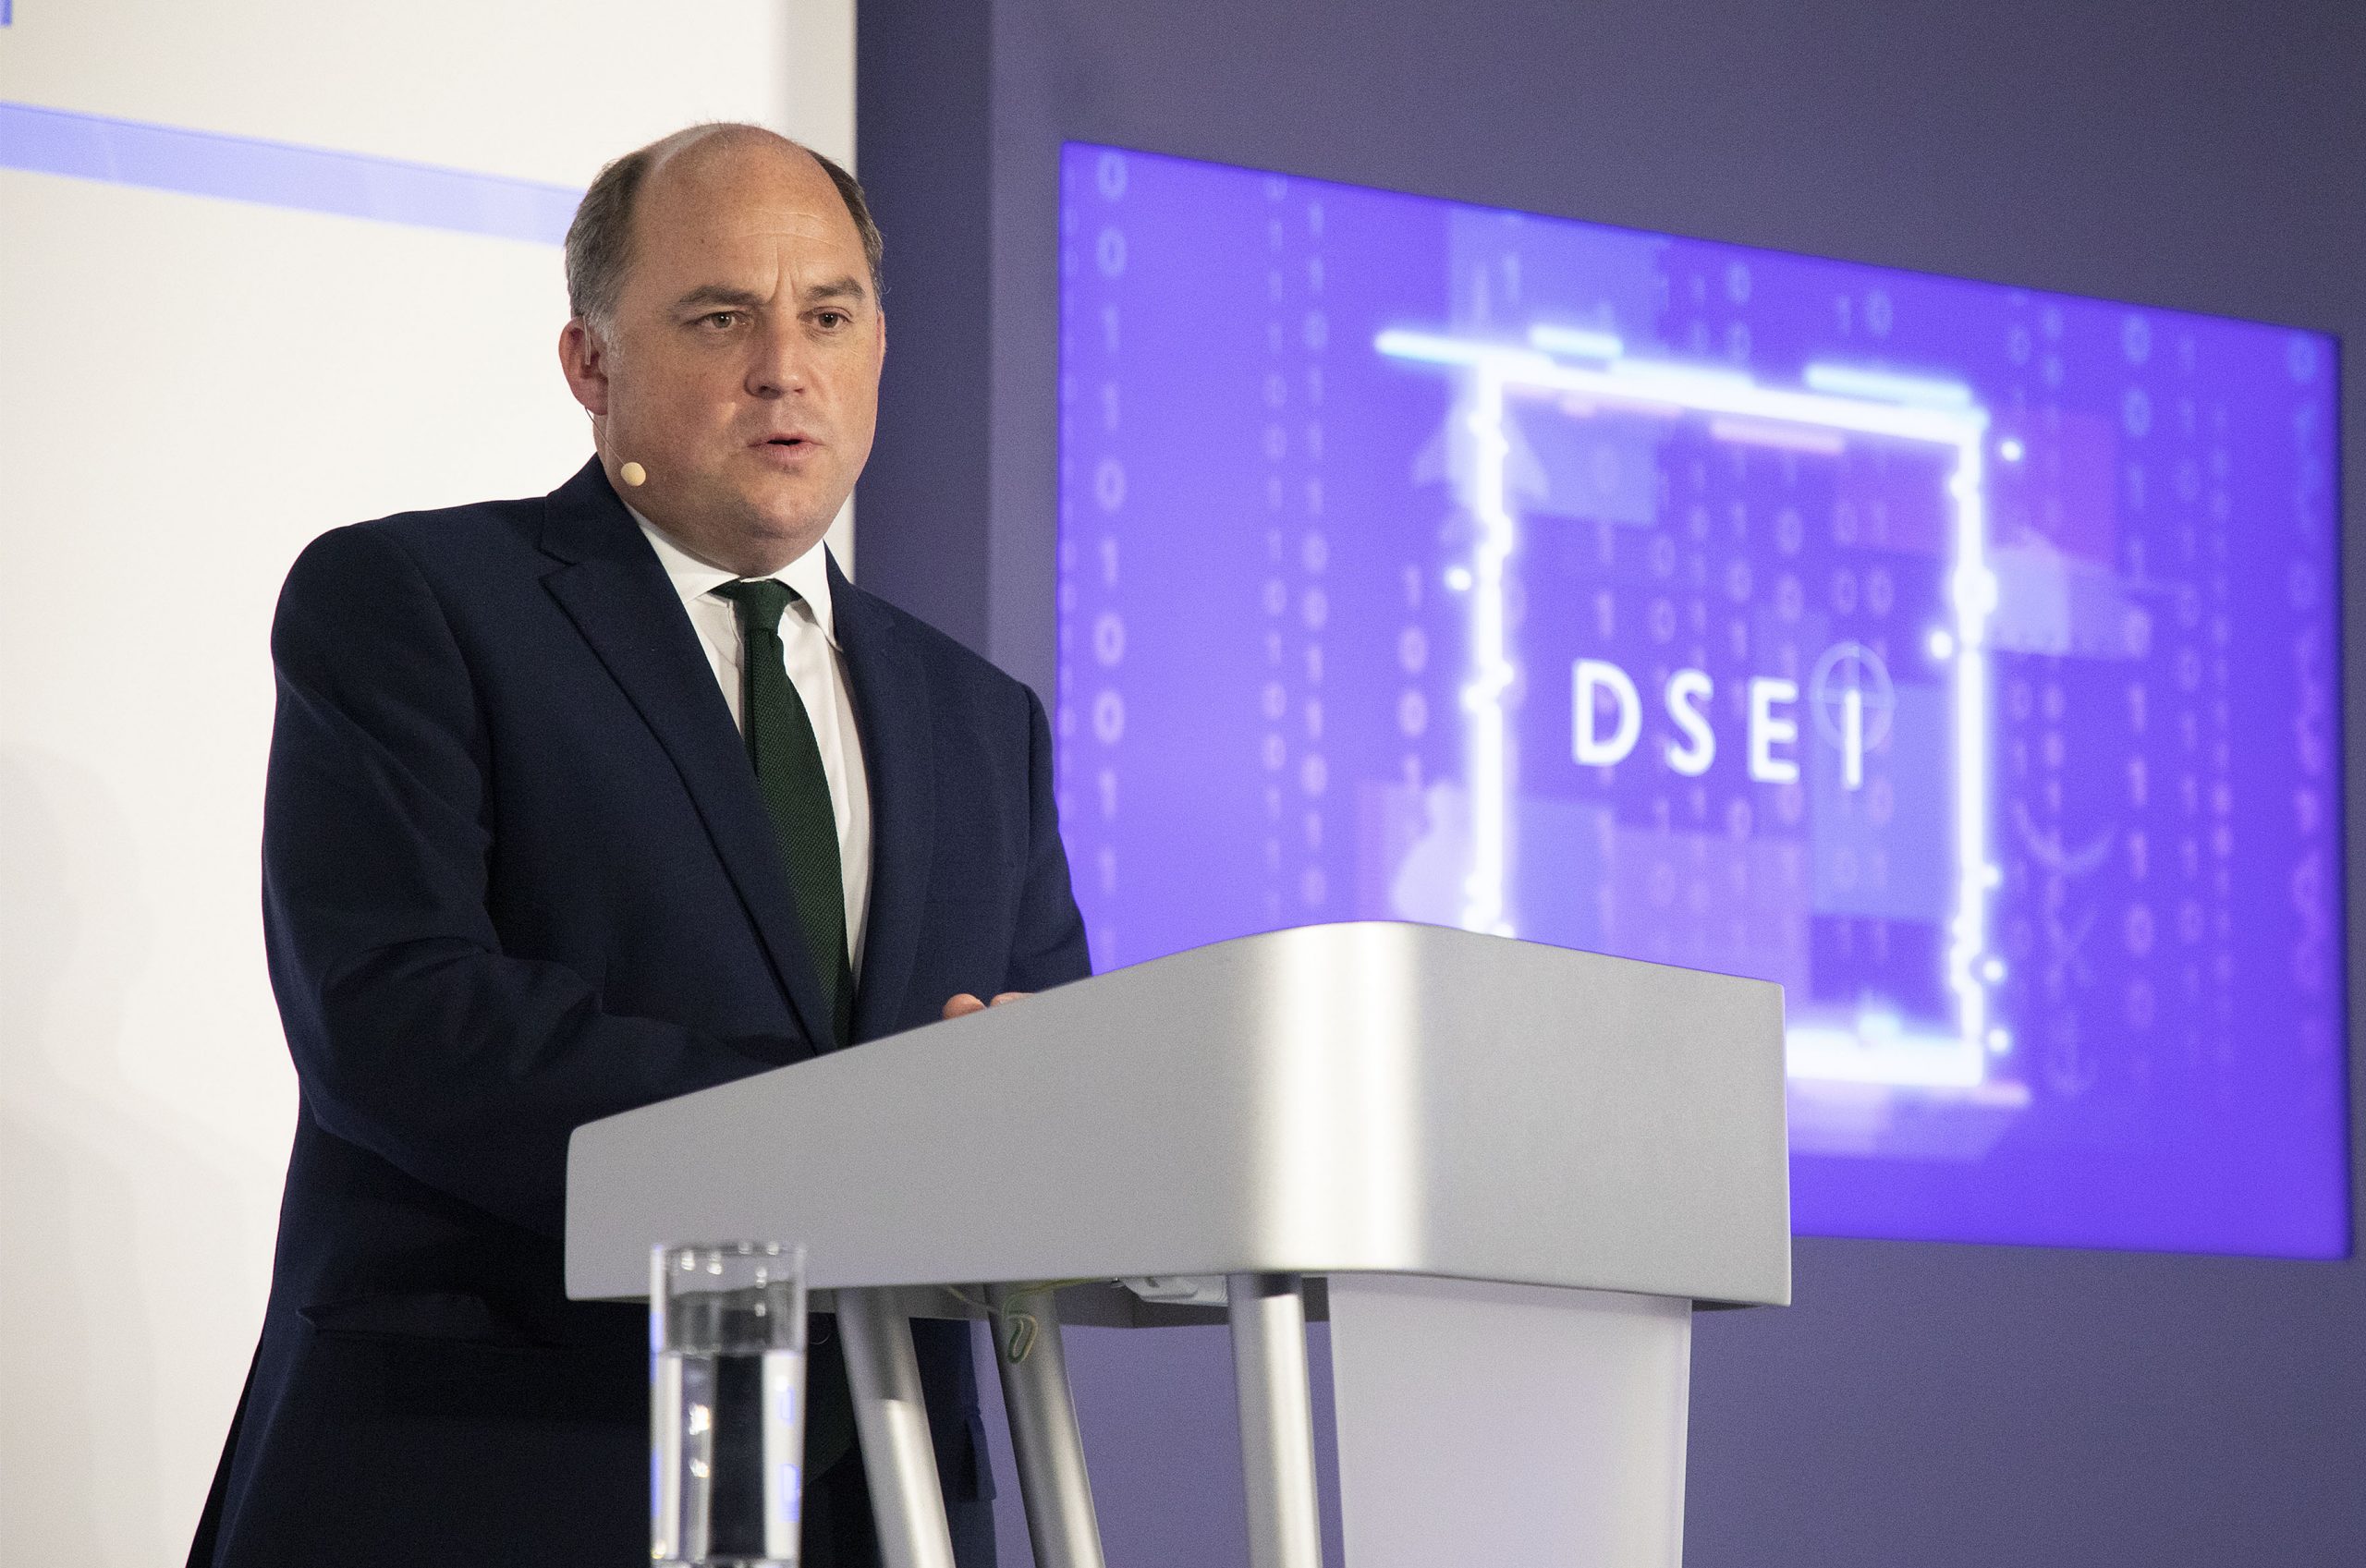 Secretary of State for Defence, The Rt Hon Ben Wallace MP delivering his keynote speech at DSEI 2021.